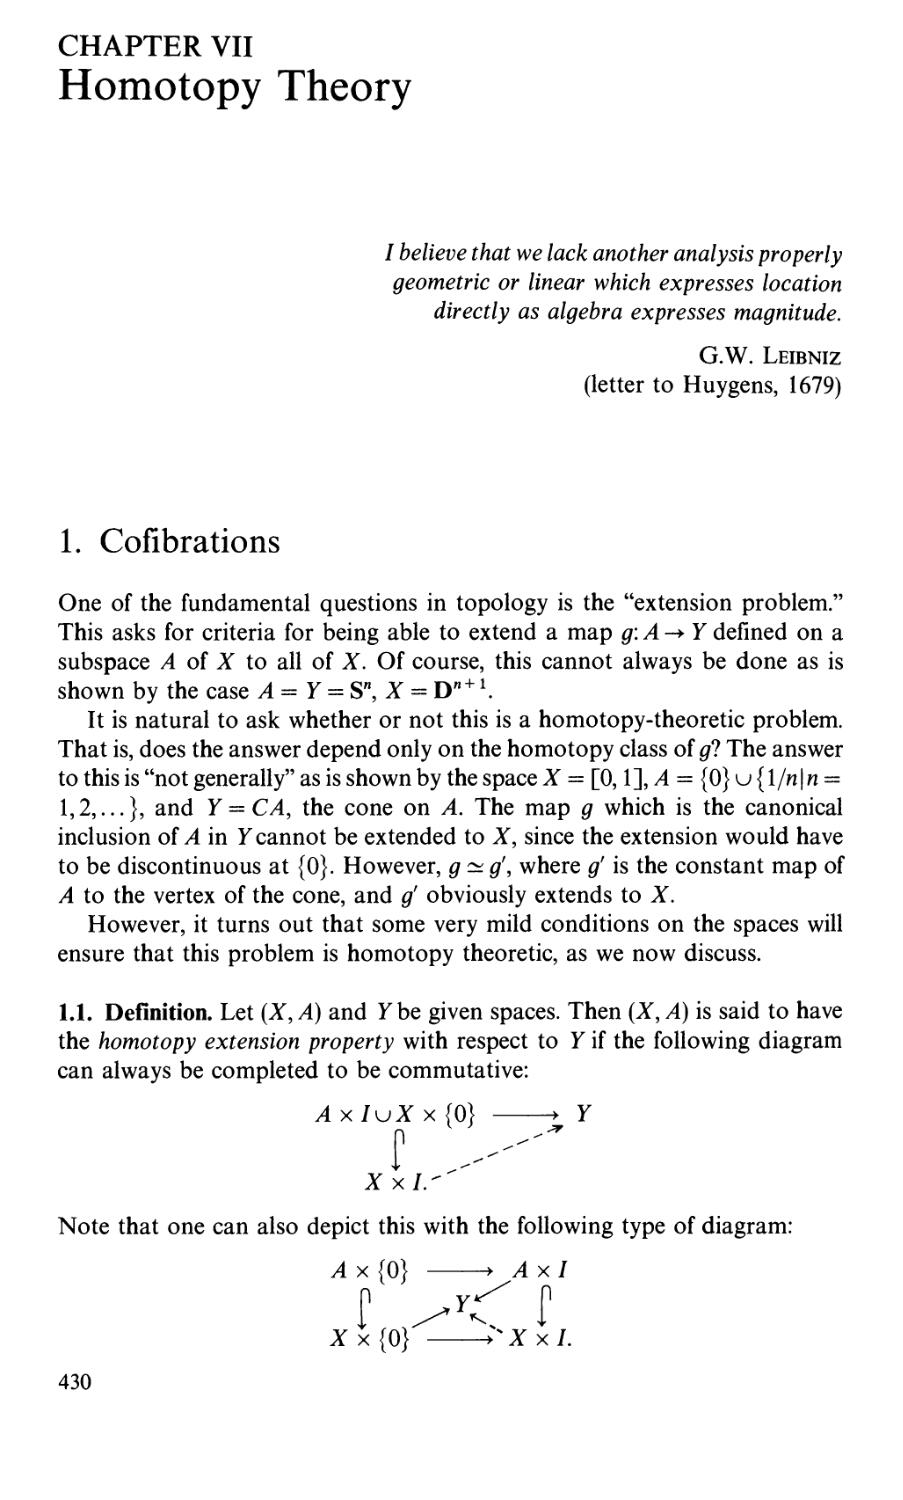 Chapter VII. Homotopy Theory